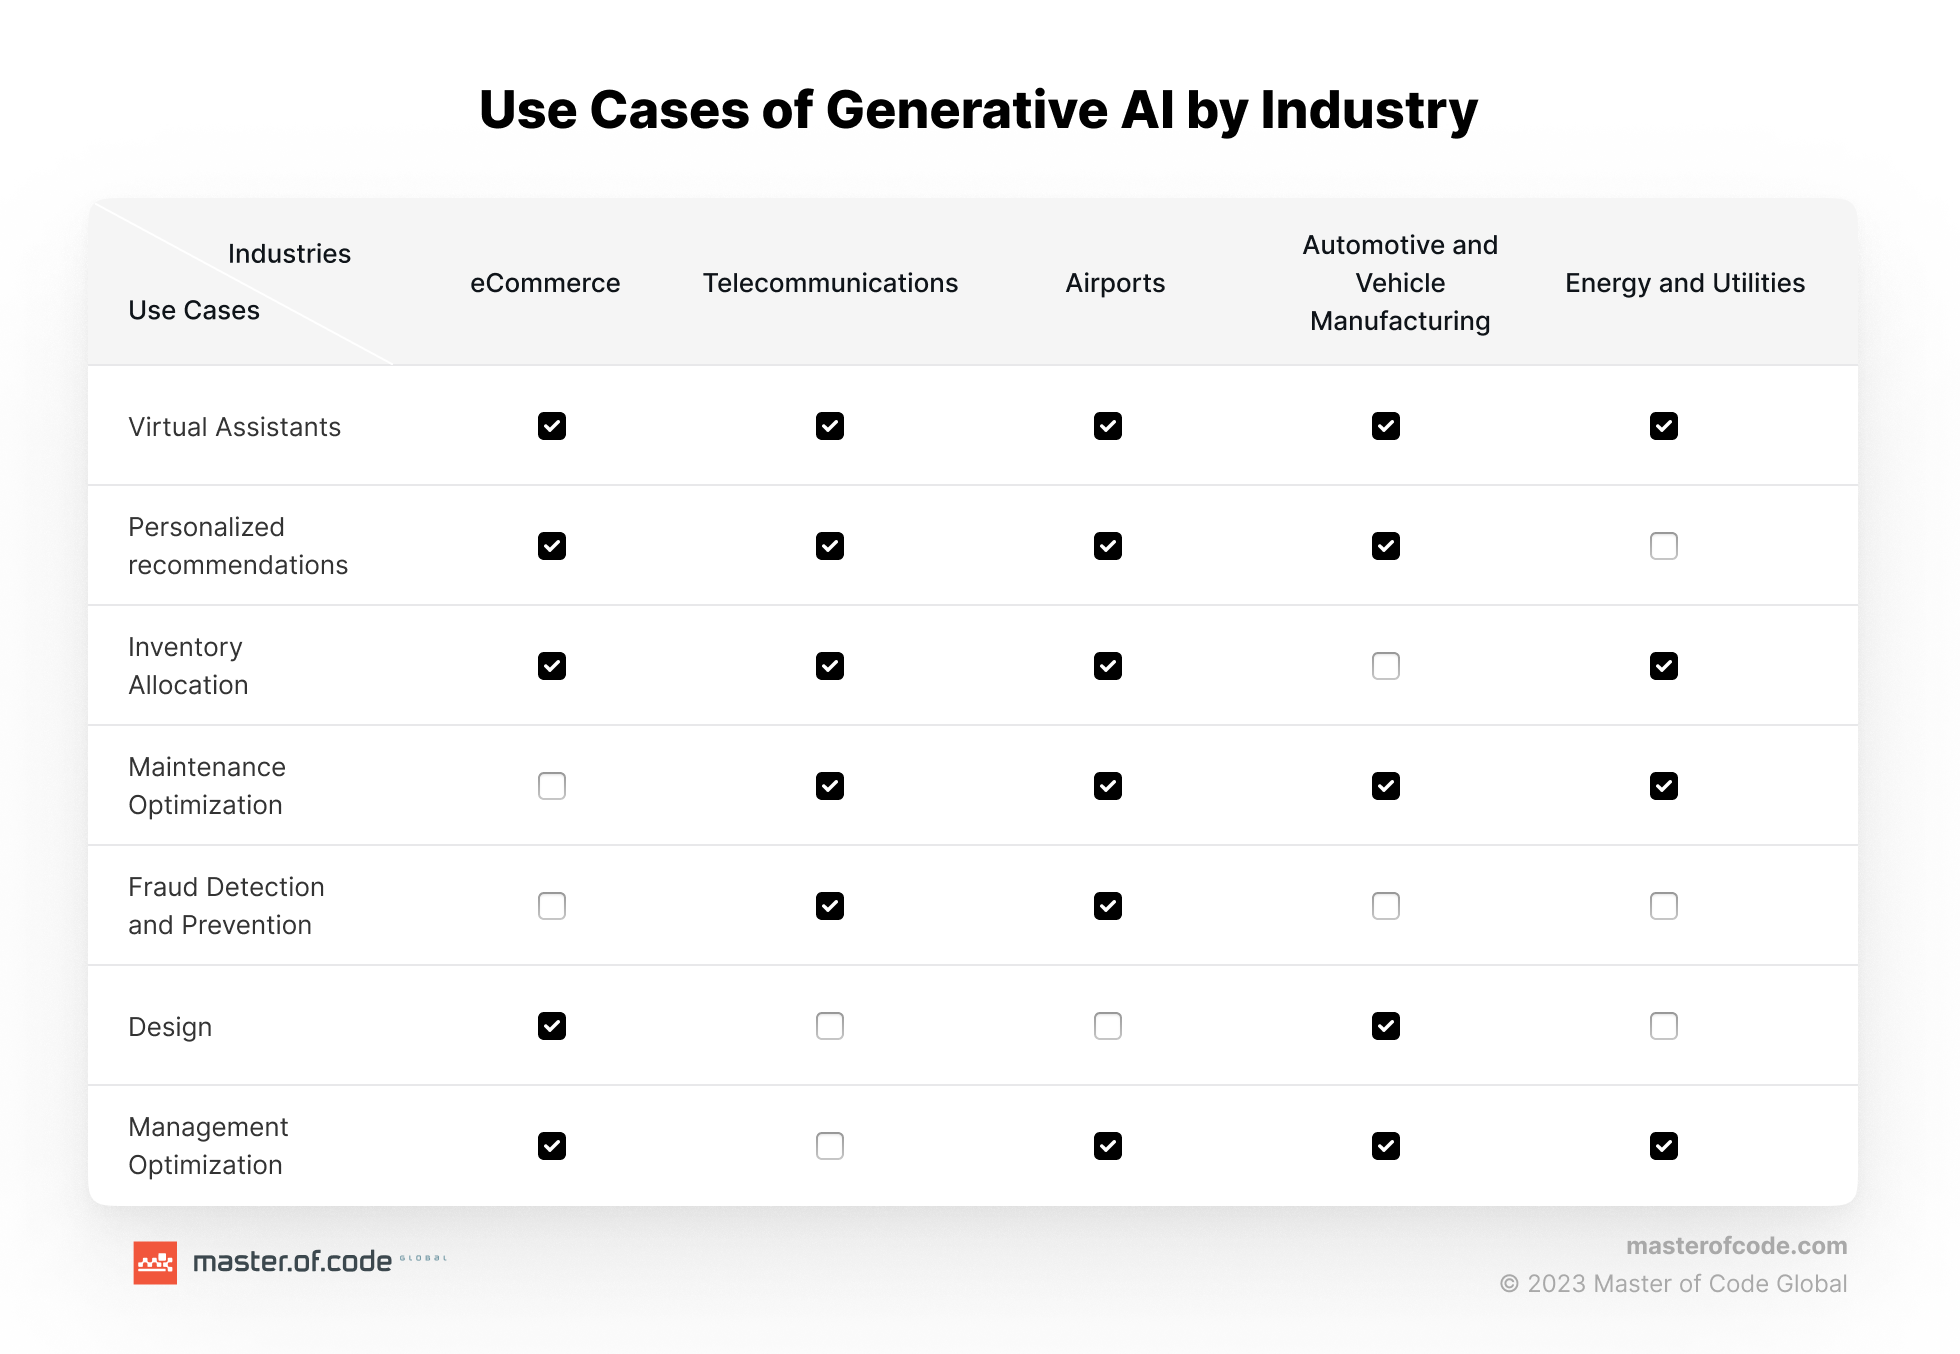 Generative AI Use Cases by Industry